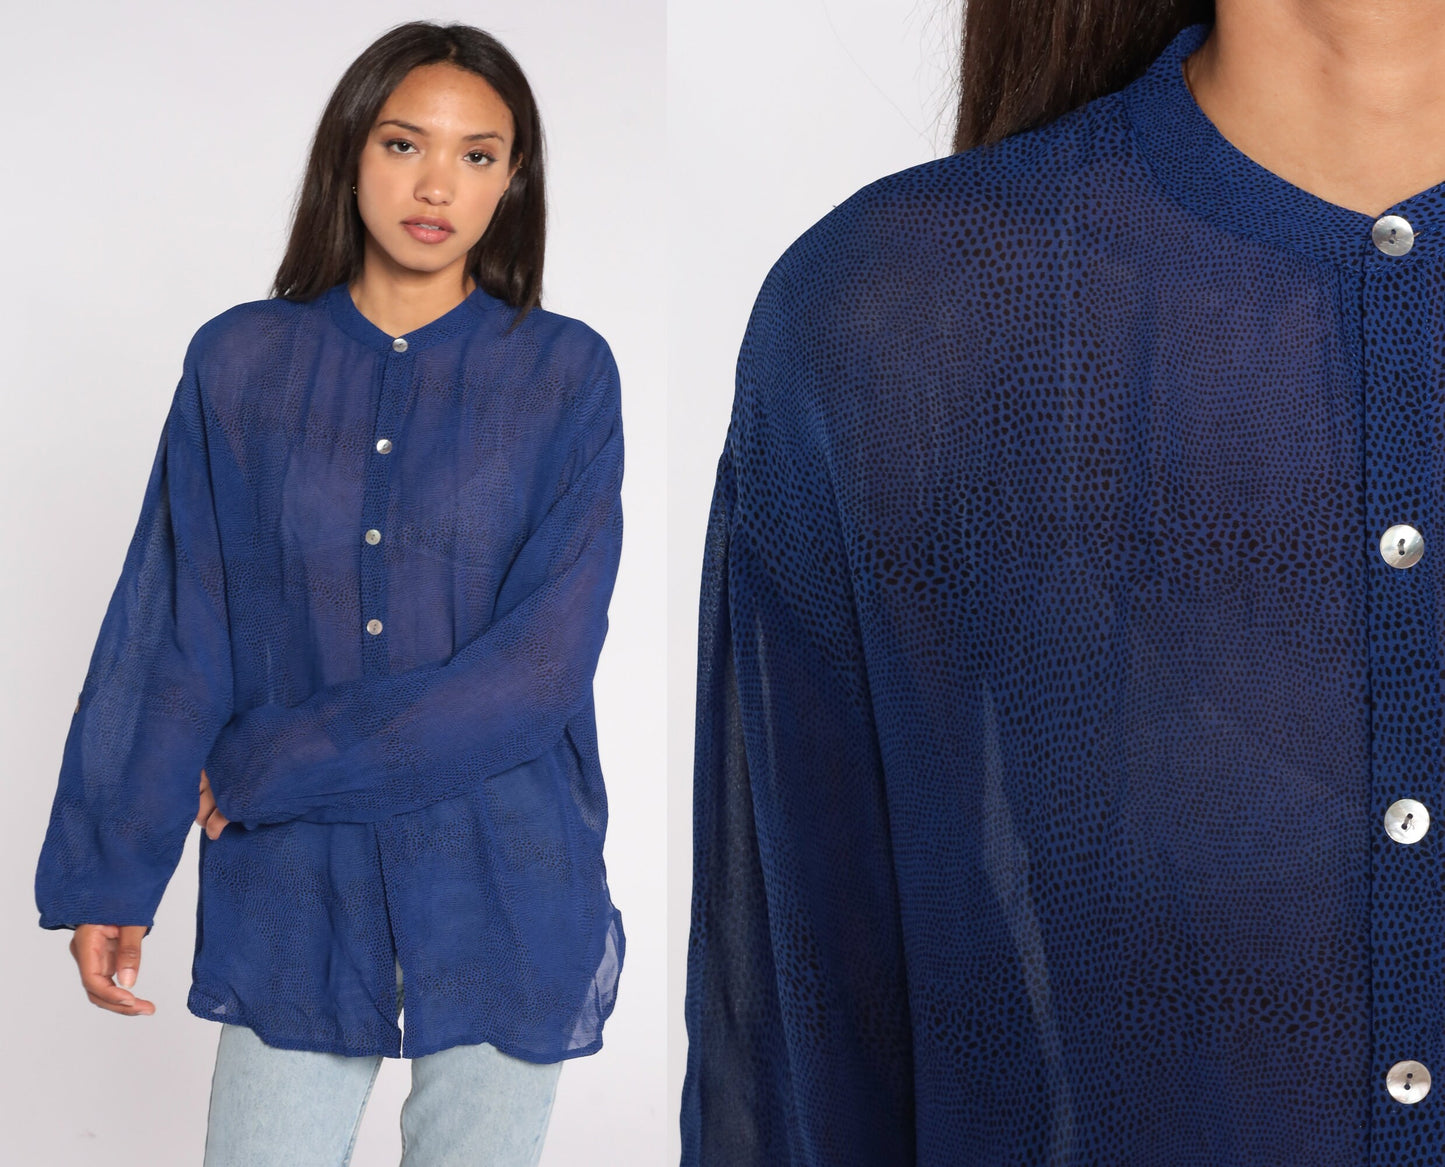 Sheer Blue Top 00s Shirt Snakeskin Print Dot Blouse Y2K Shirt Long Sleeve Button Up See Through Vintage Oversized Extra Small xs 2